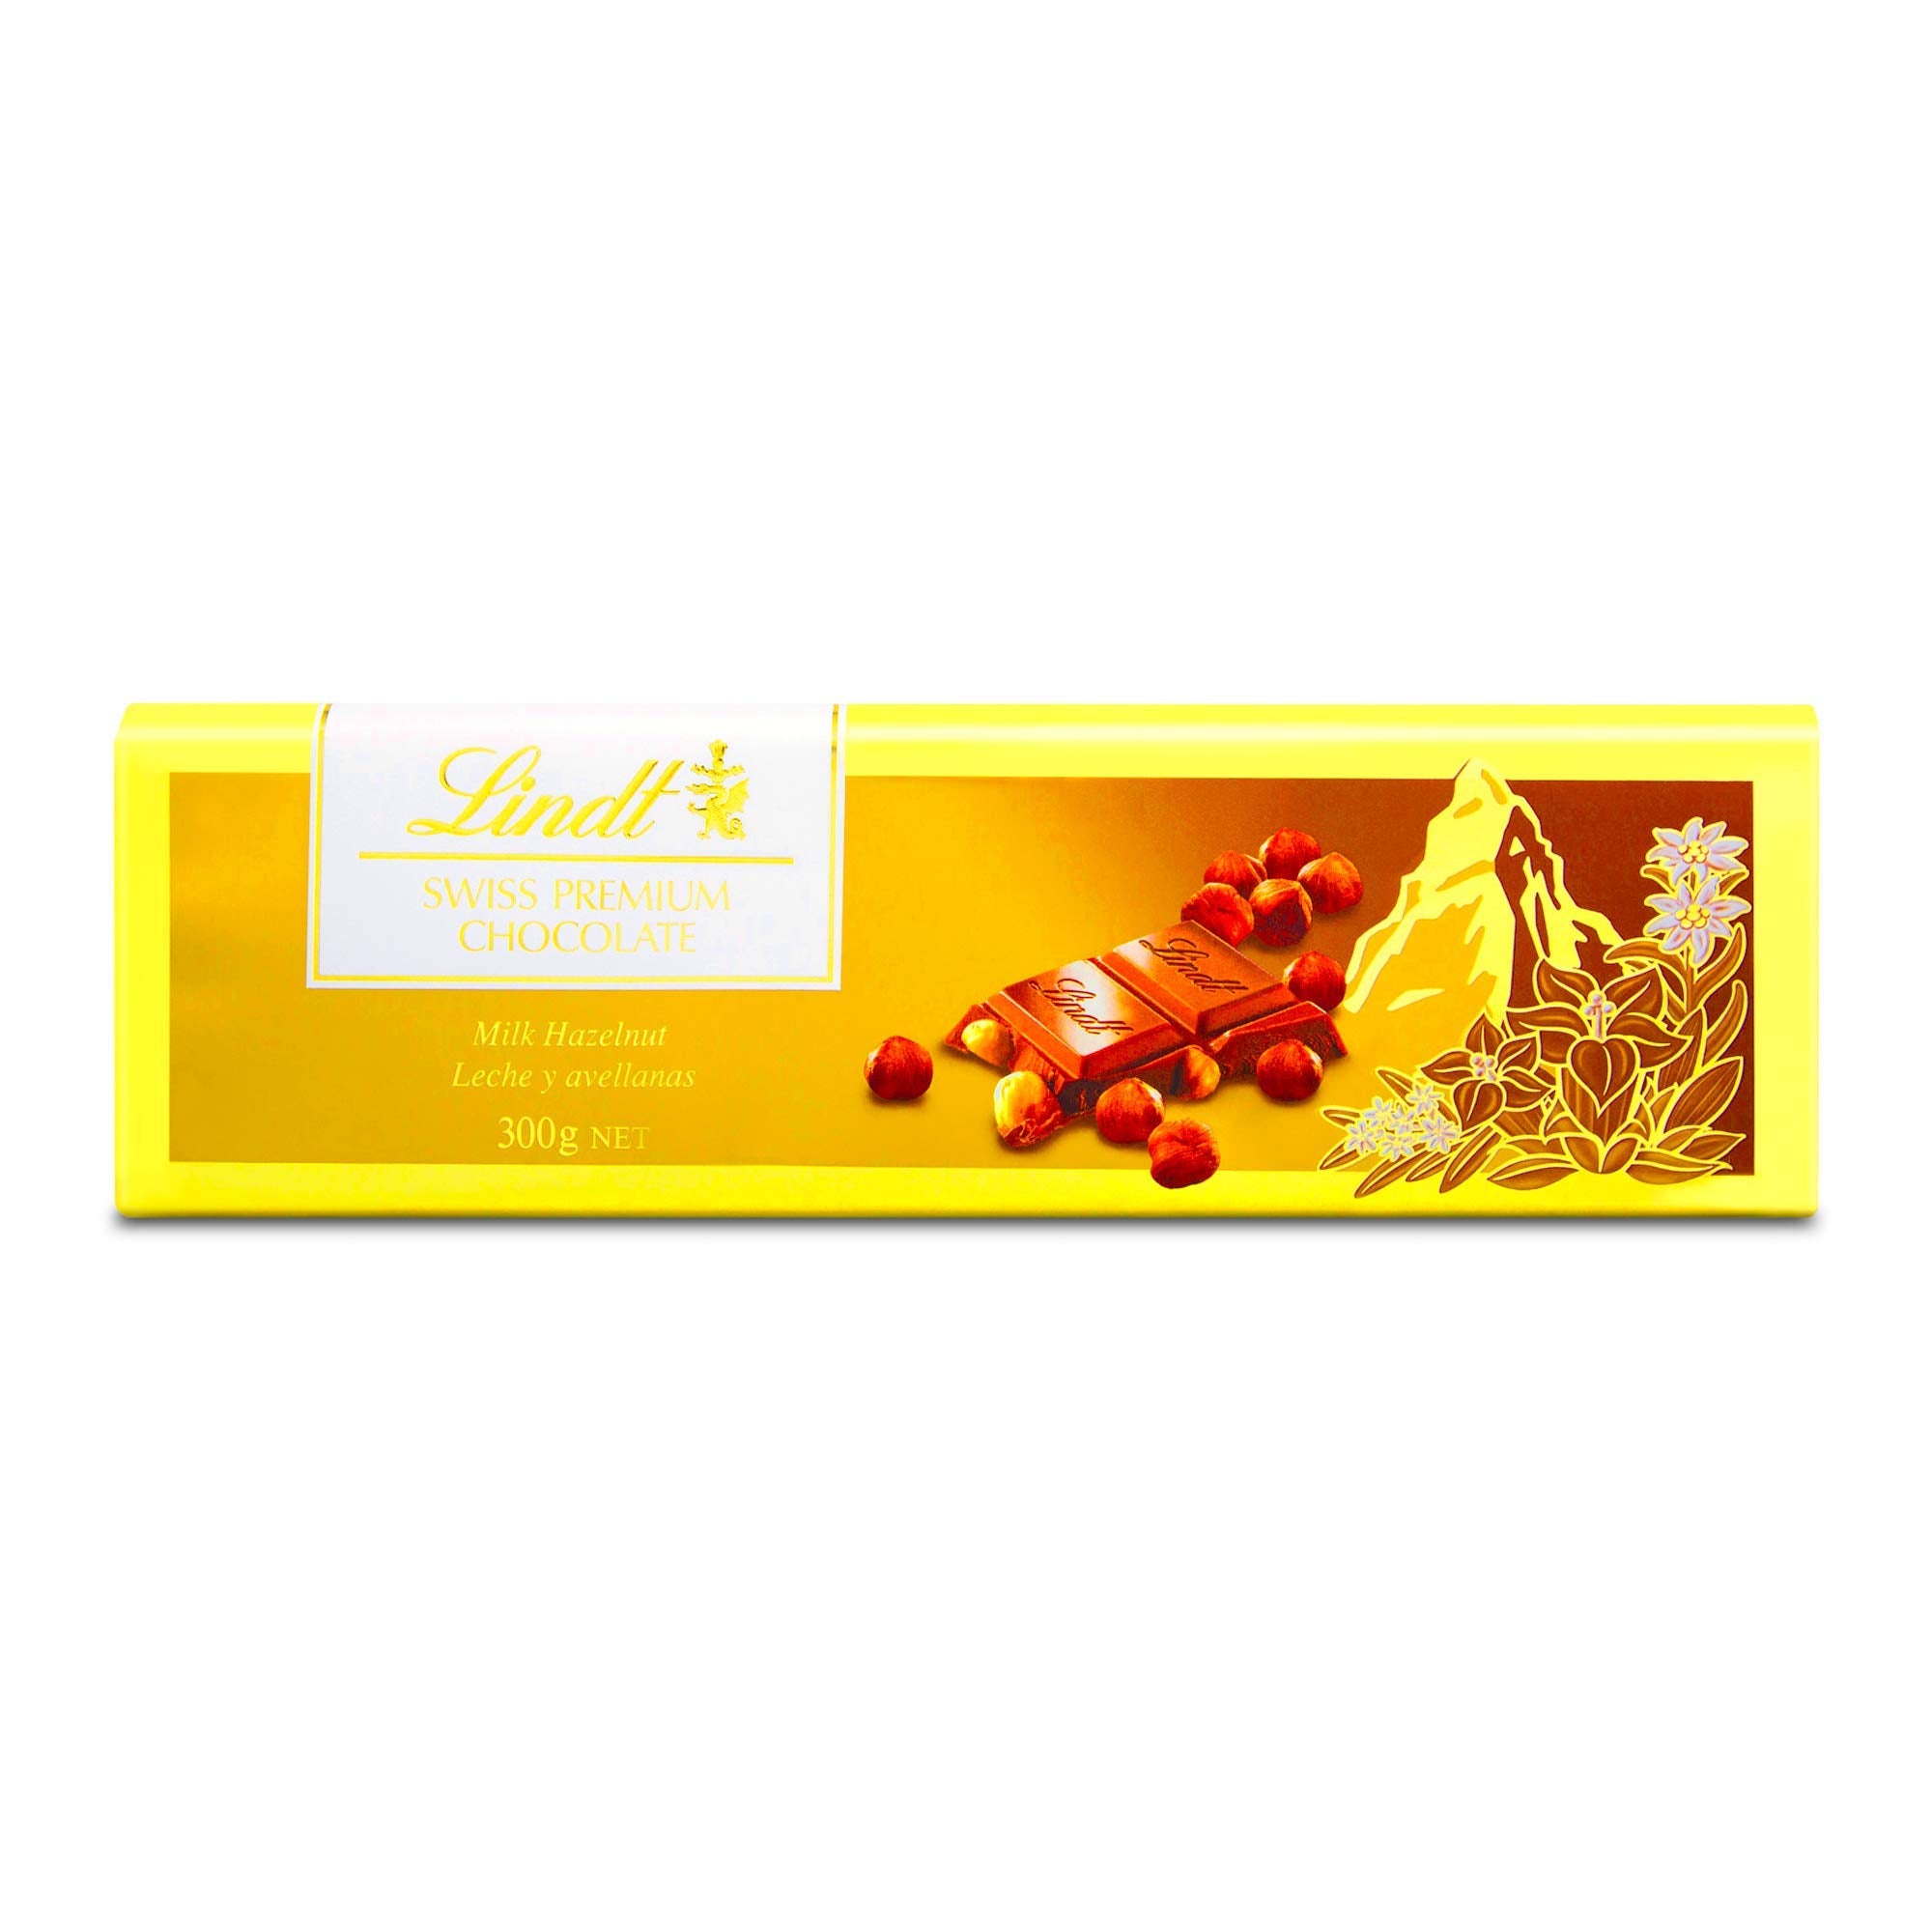 Lindt Gold Tab Chocolate with Hazelnut 300 gm Pack